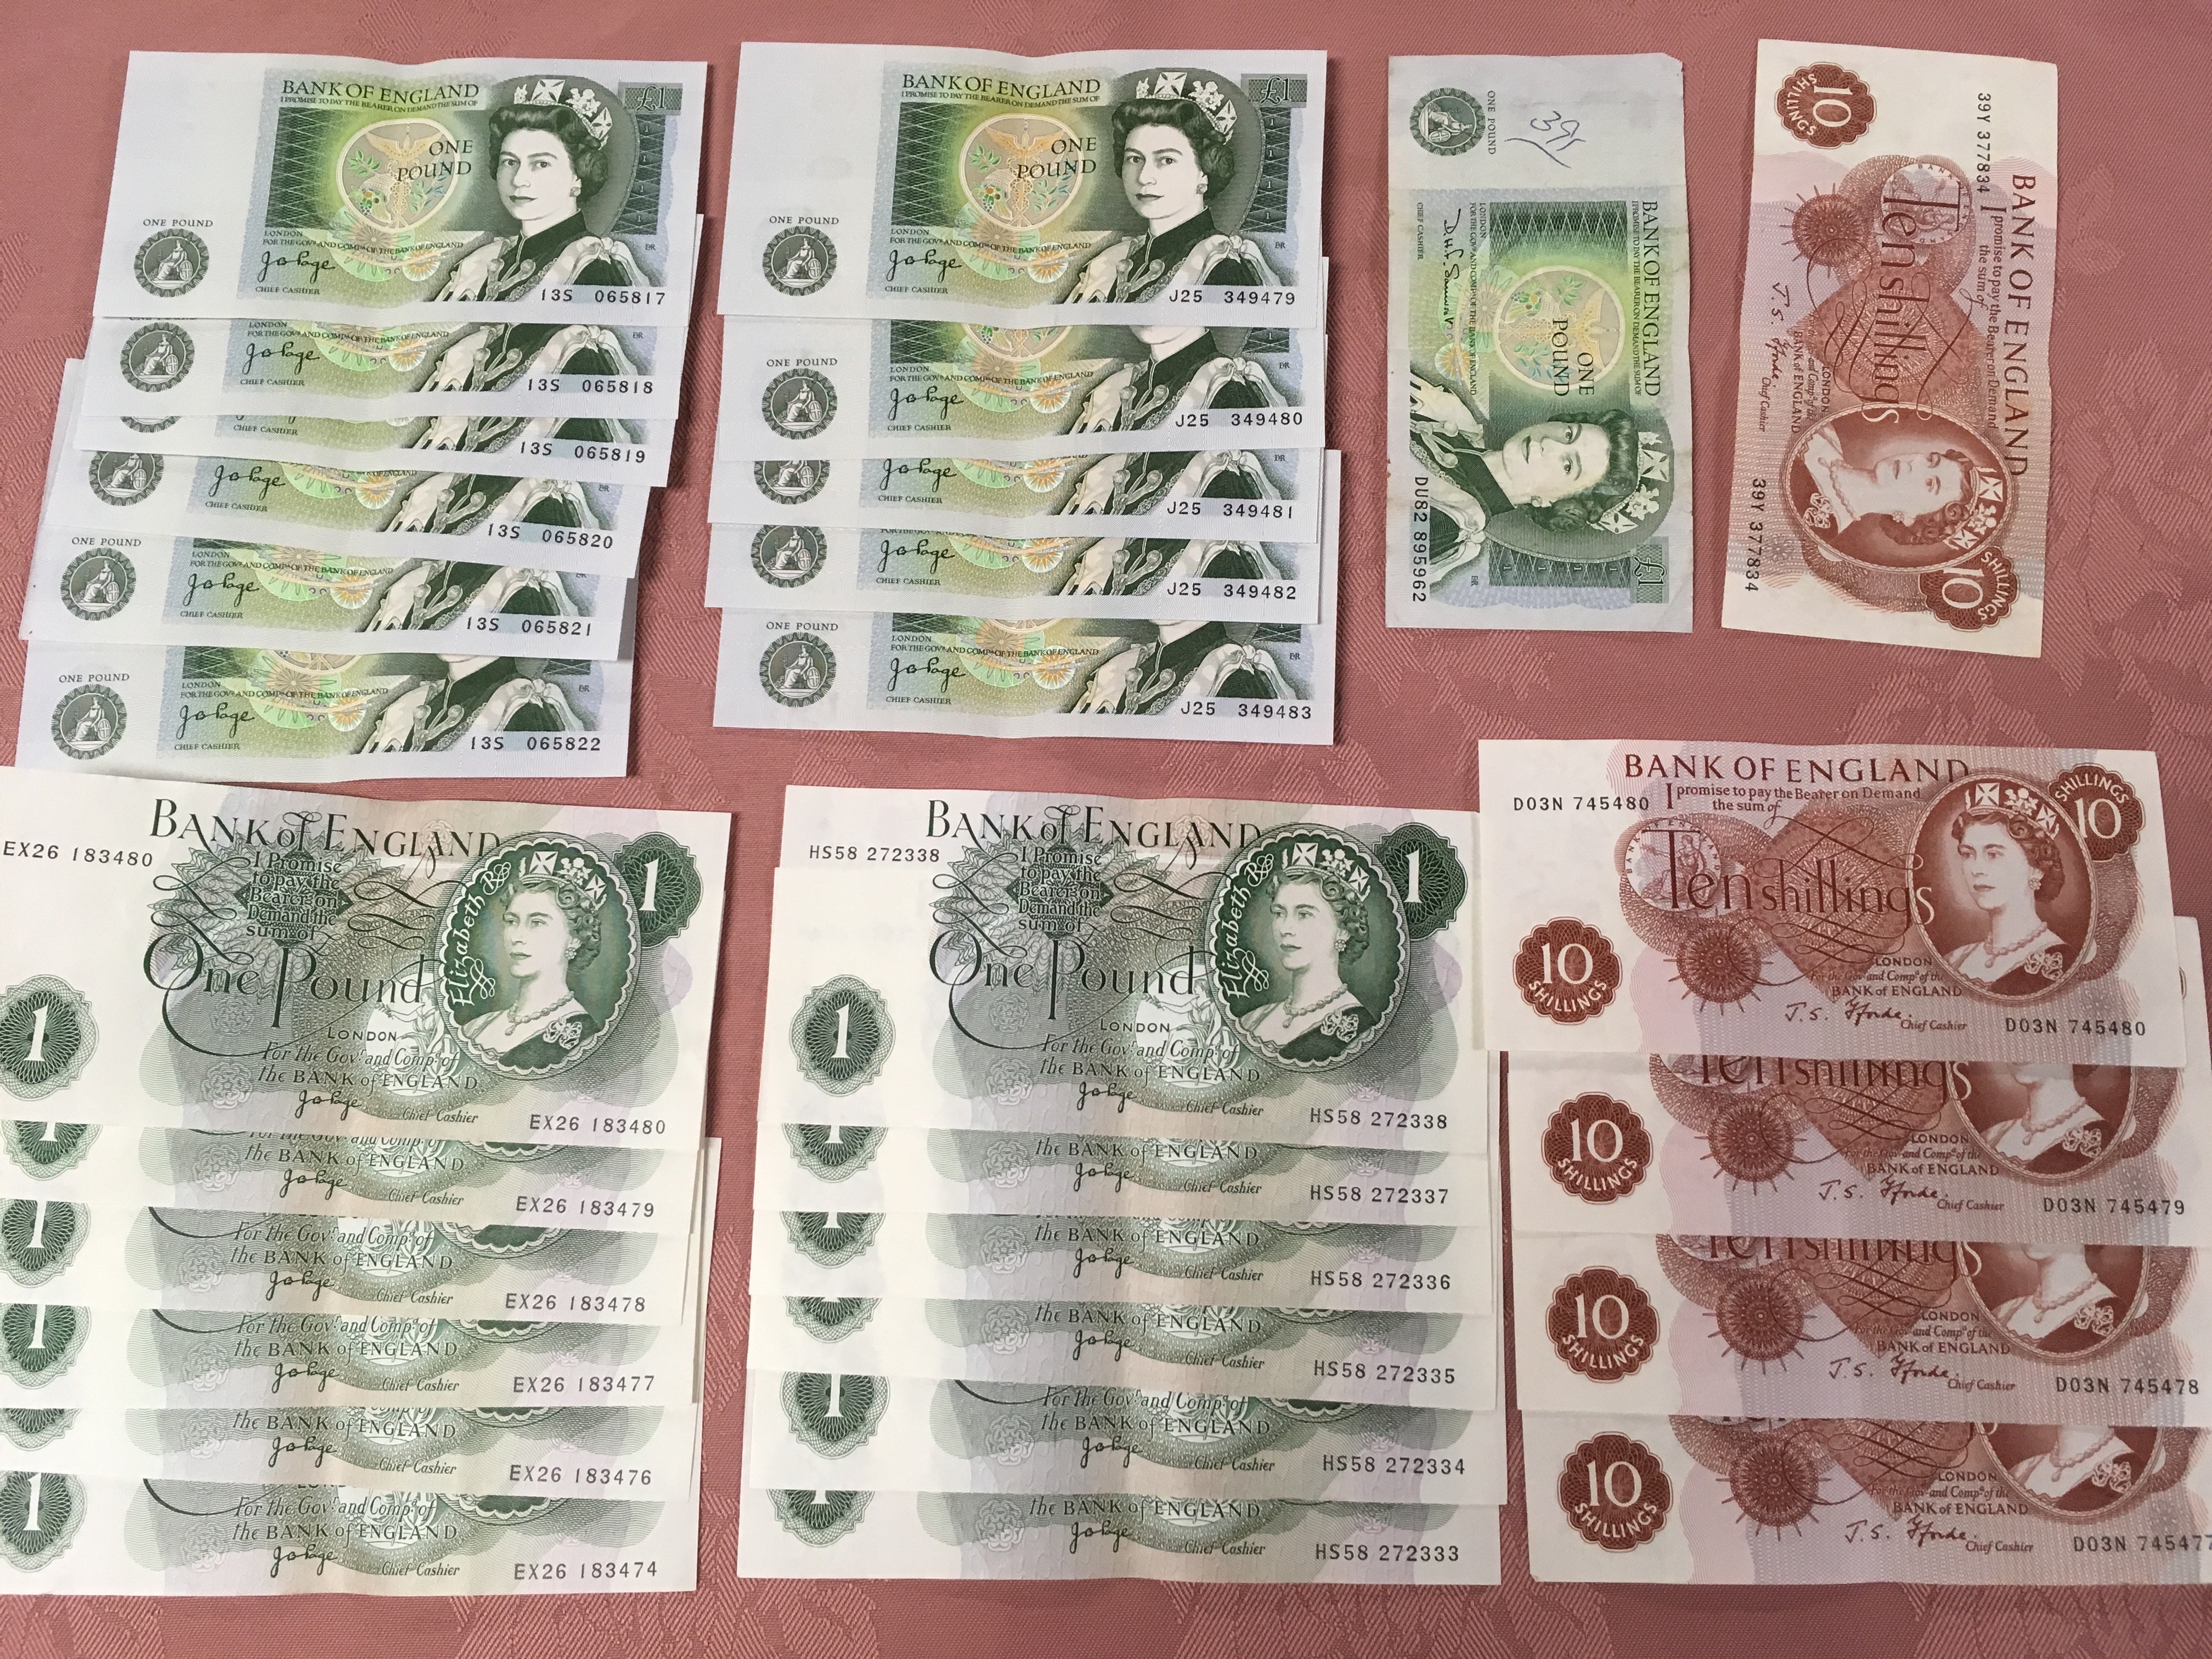 GB BANKNOTES: J.B. PAGE £1 (12), FFORDE 10/- (5), LATER £1 (12), SOME CONSECUTIVE NUMBERS (29)